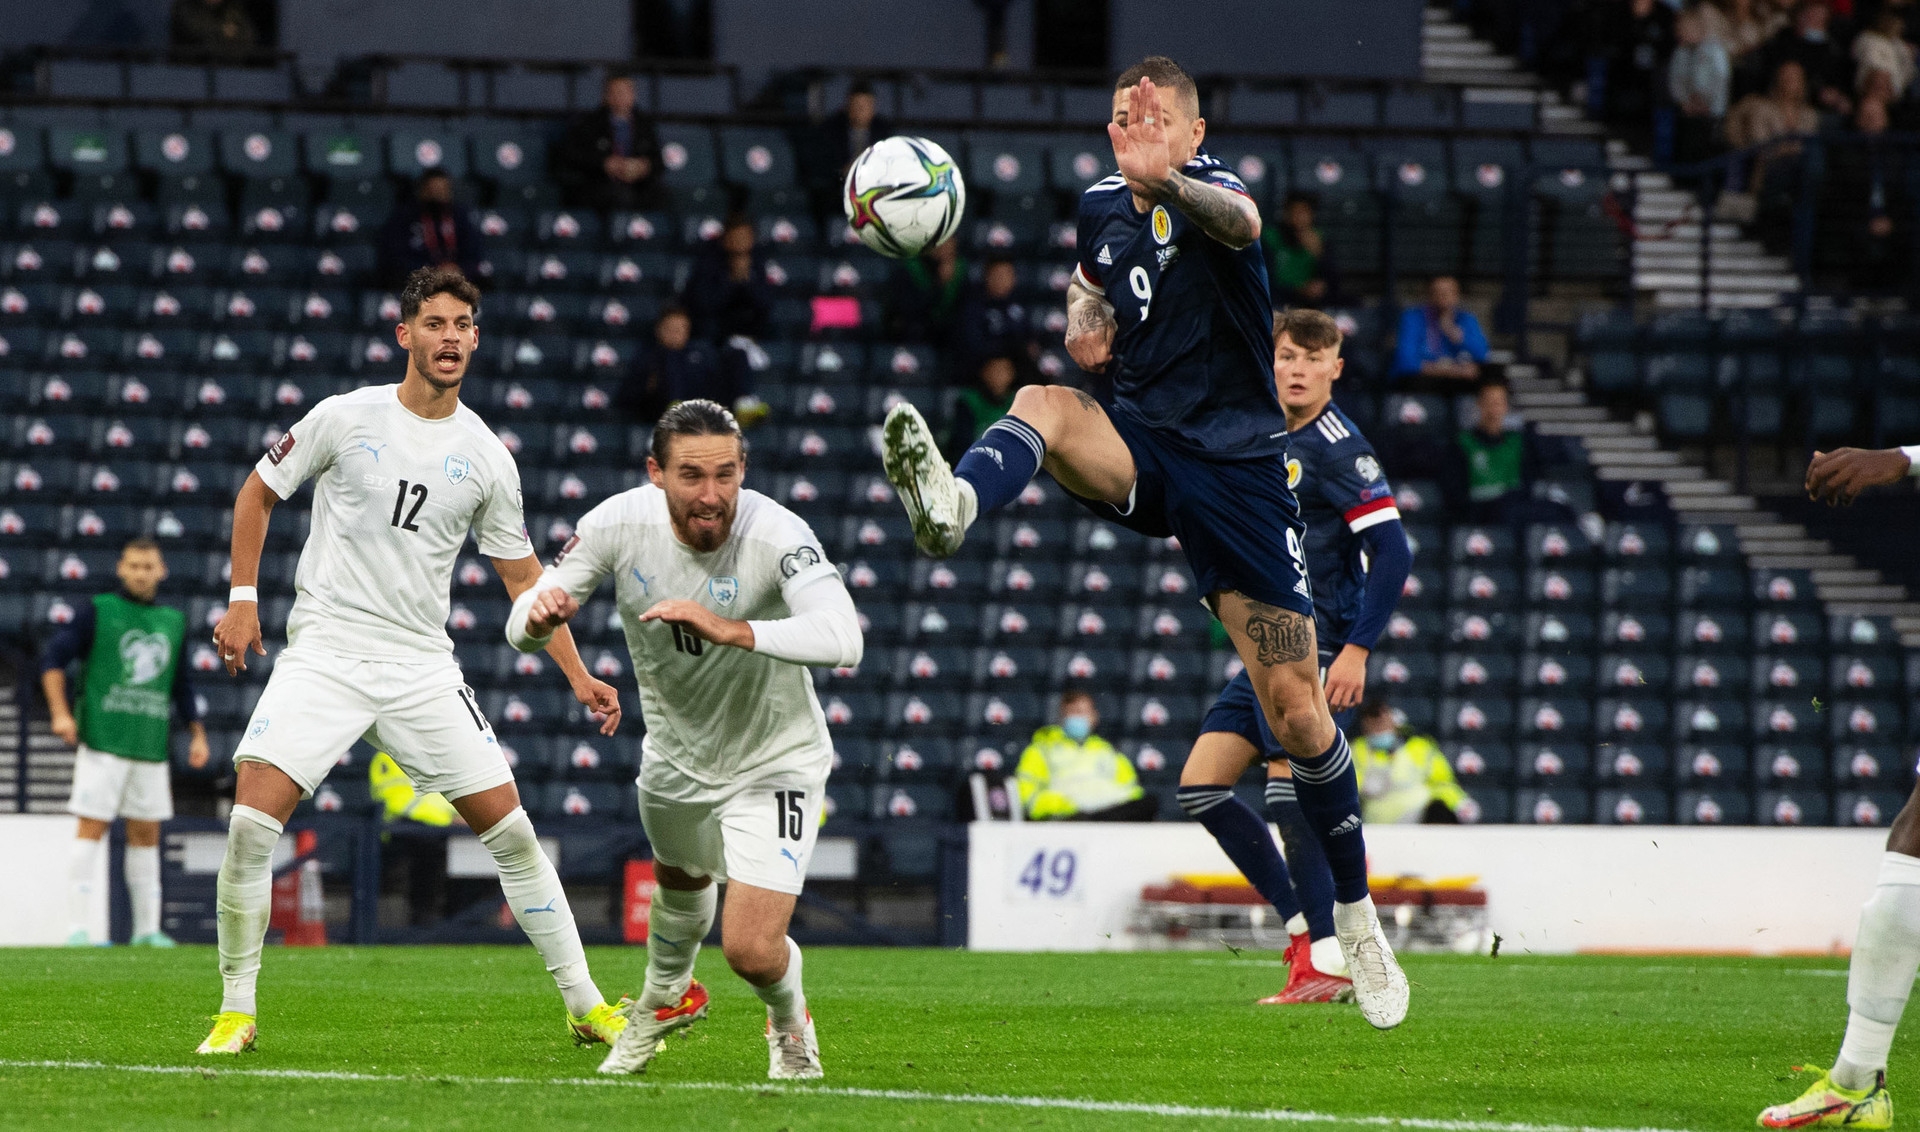 <strong>Lyndon Dykes had missed a penalty and feared it wasn’t going to be his night when the referee chopped off this apparent leveller. Fortunately for Scotland, VAR intervened and allowed the goal to stand.</strong>”/><span
class=